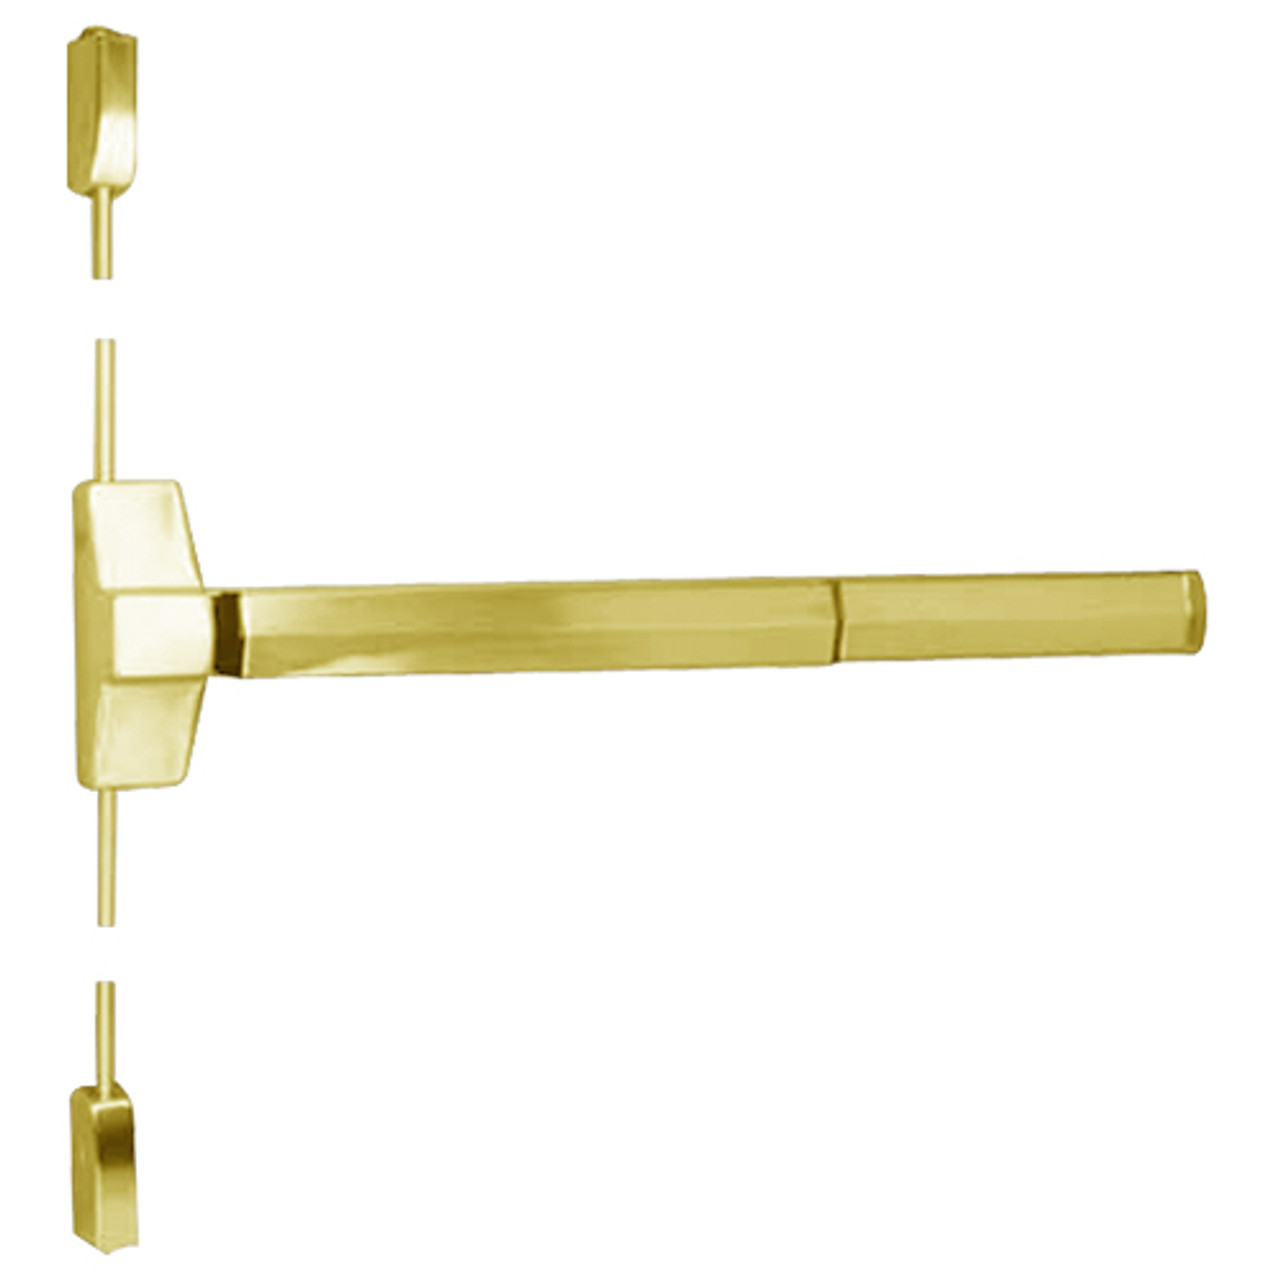 7110F-24-605 Yale 7000 Series Fire Rated Surface Vertical Rod Exit Device in Bright Brass